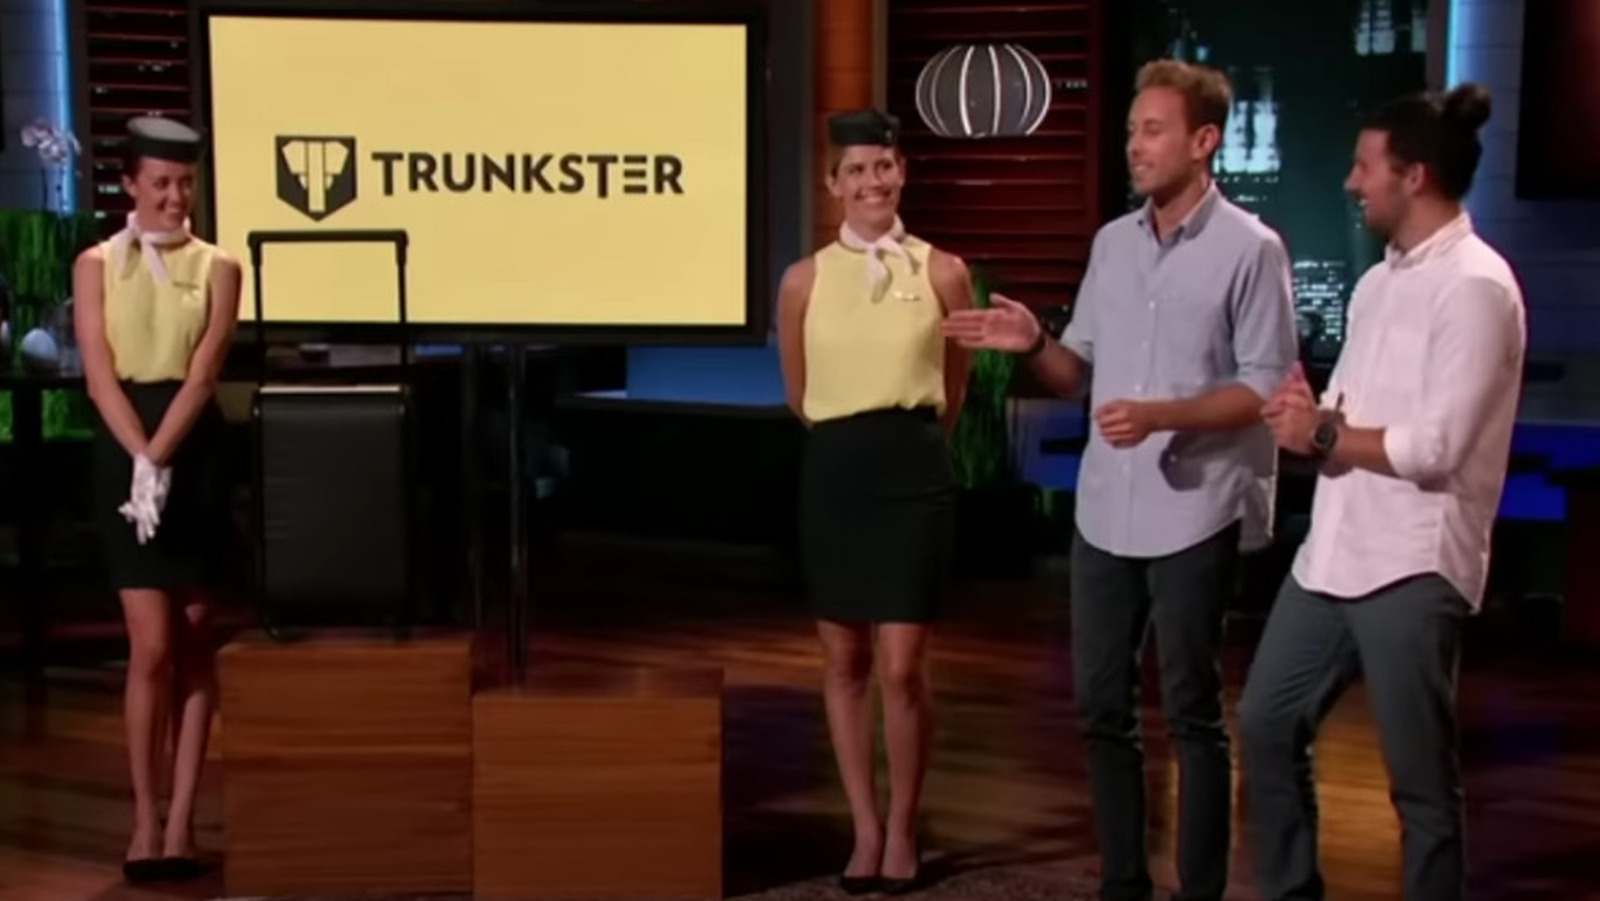 What Really Came Of Trunkster Smart Luggage From Shark Tank? – Explore